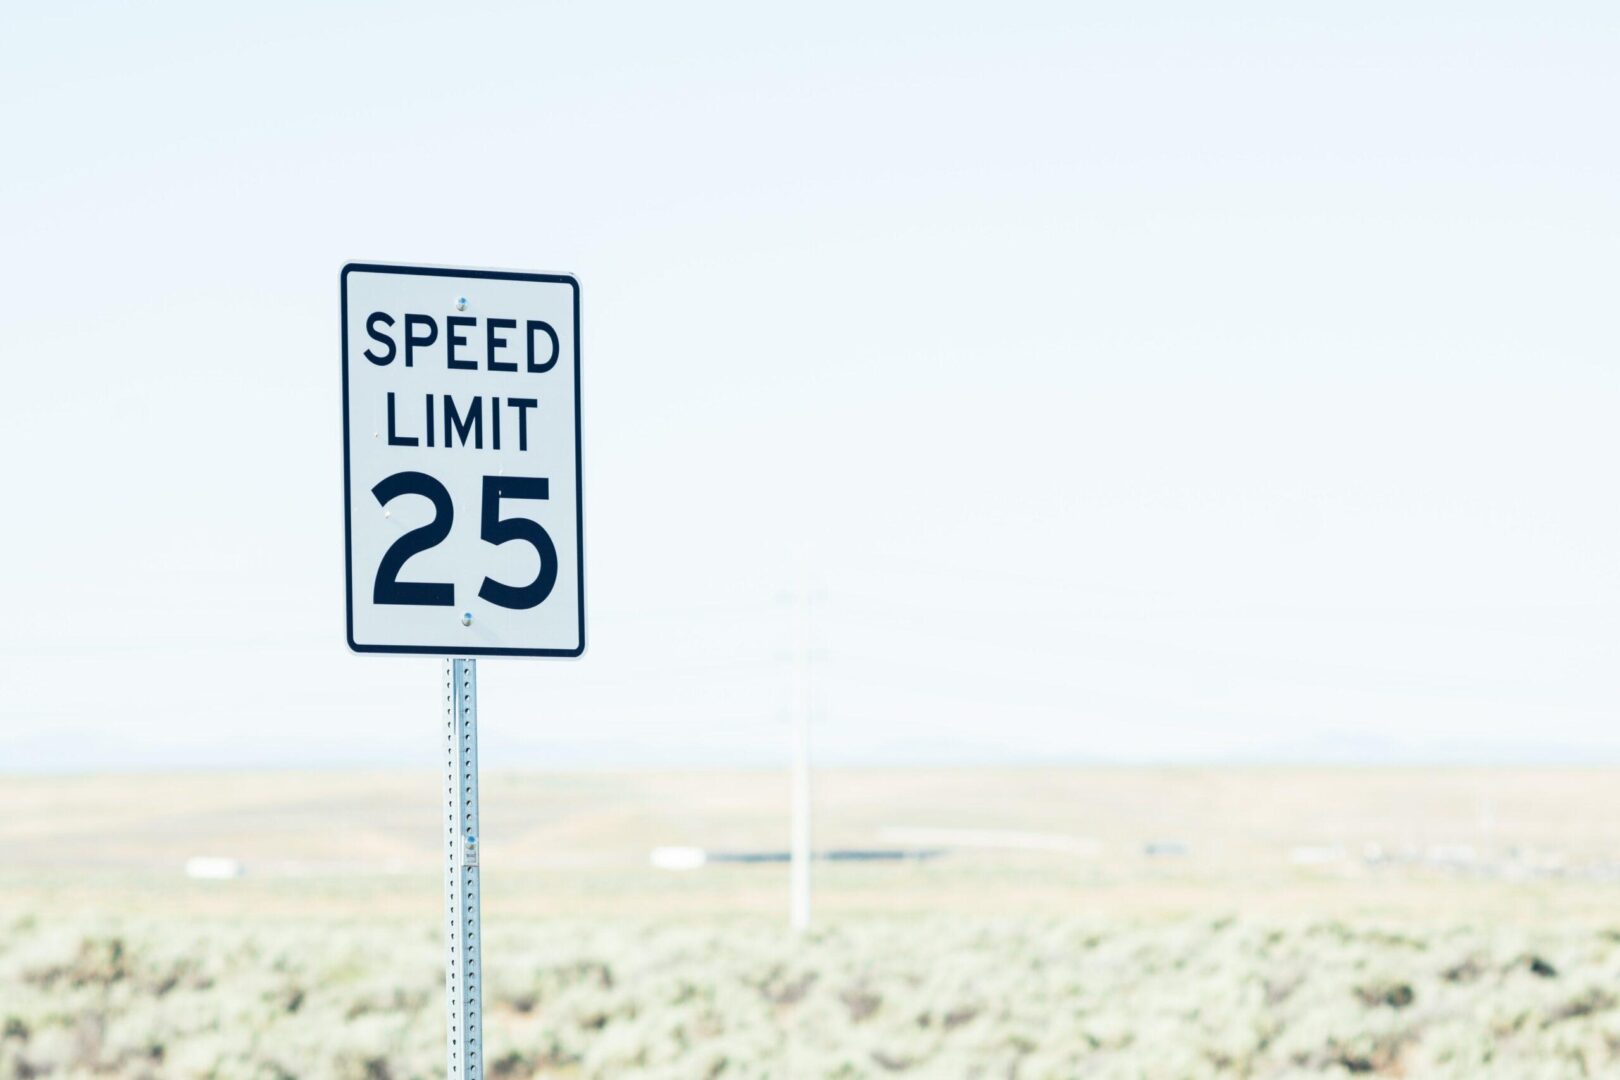 A speed limit sign in the middle of nowhere.